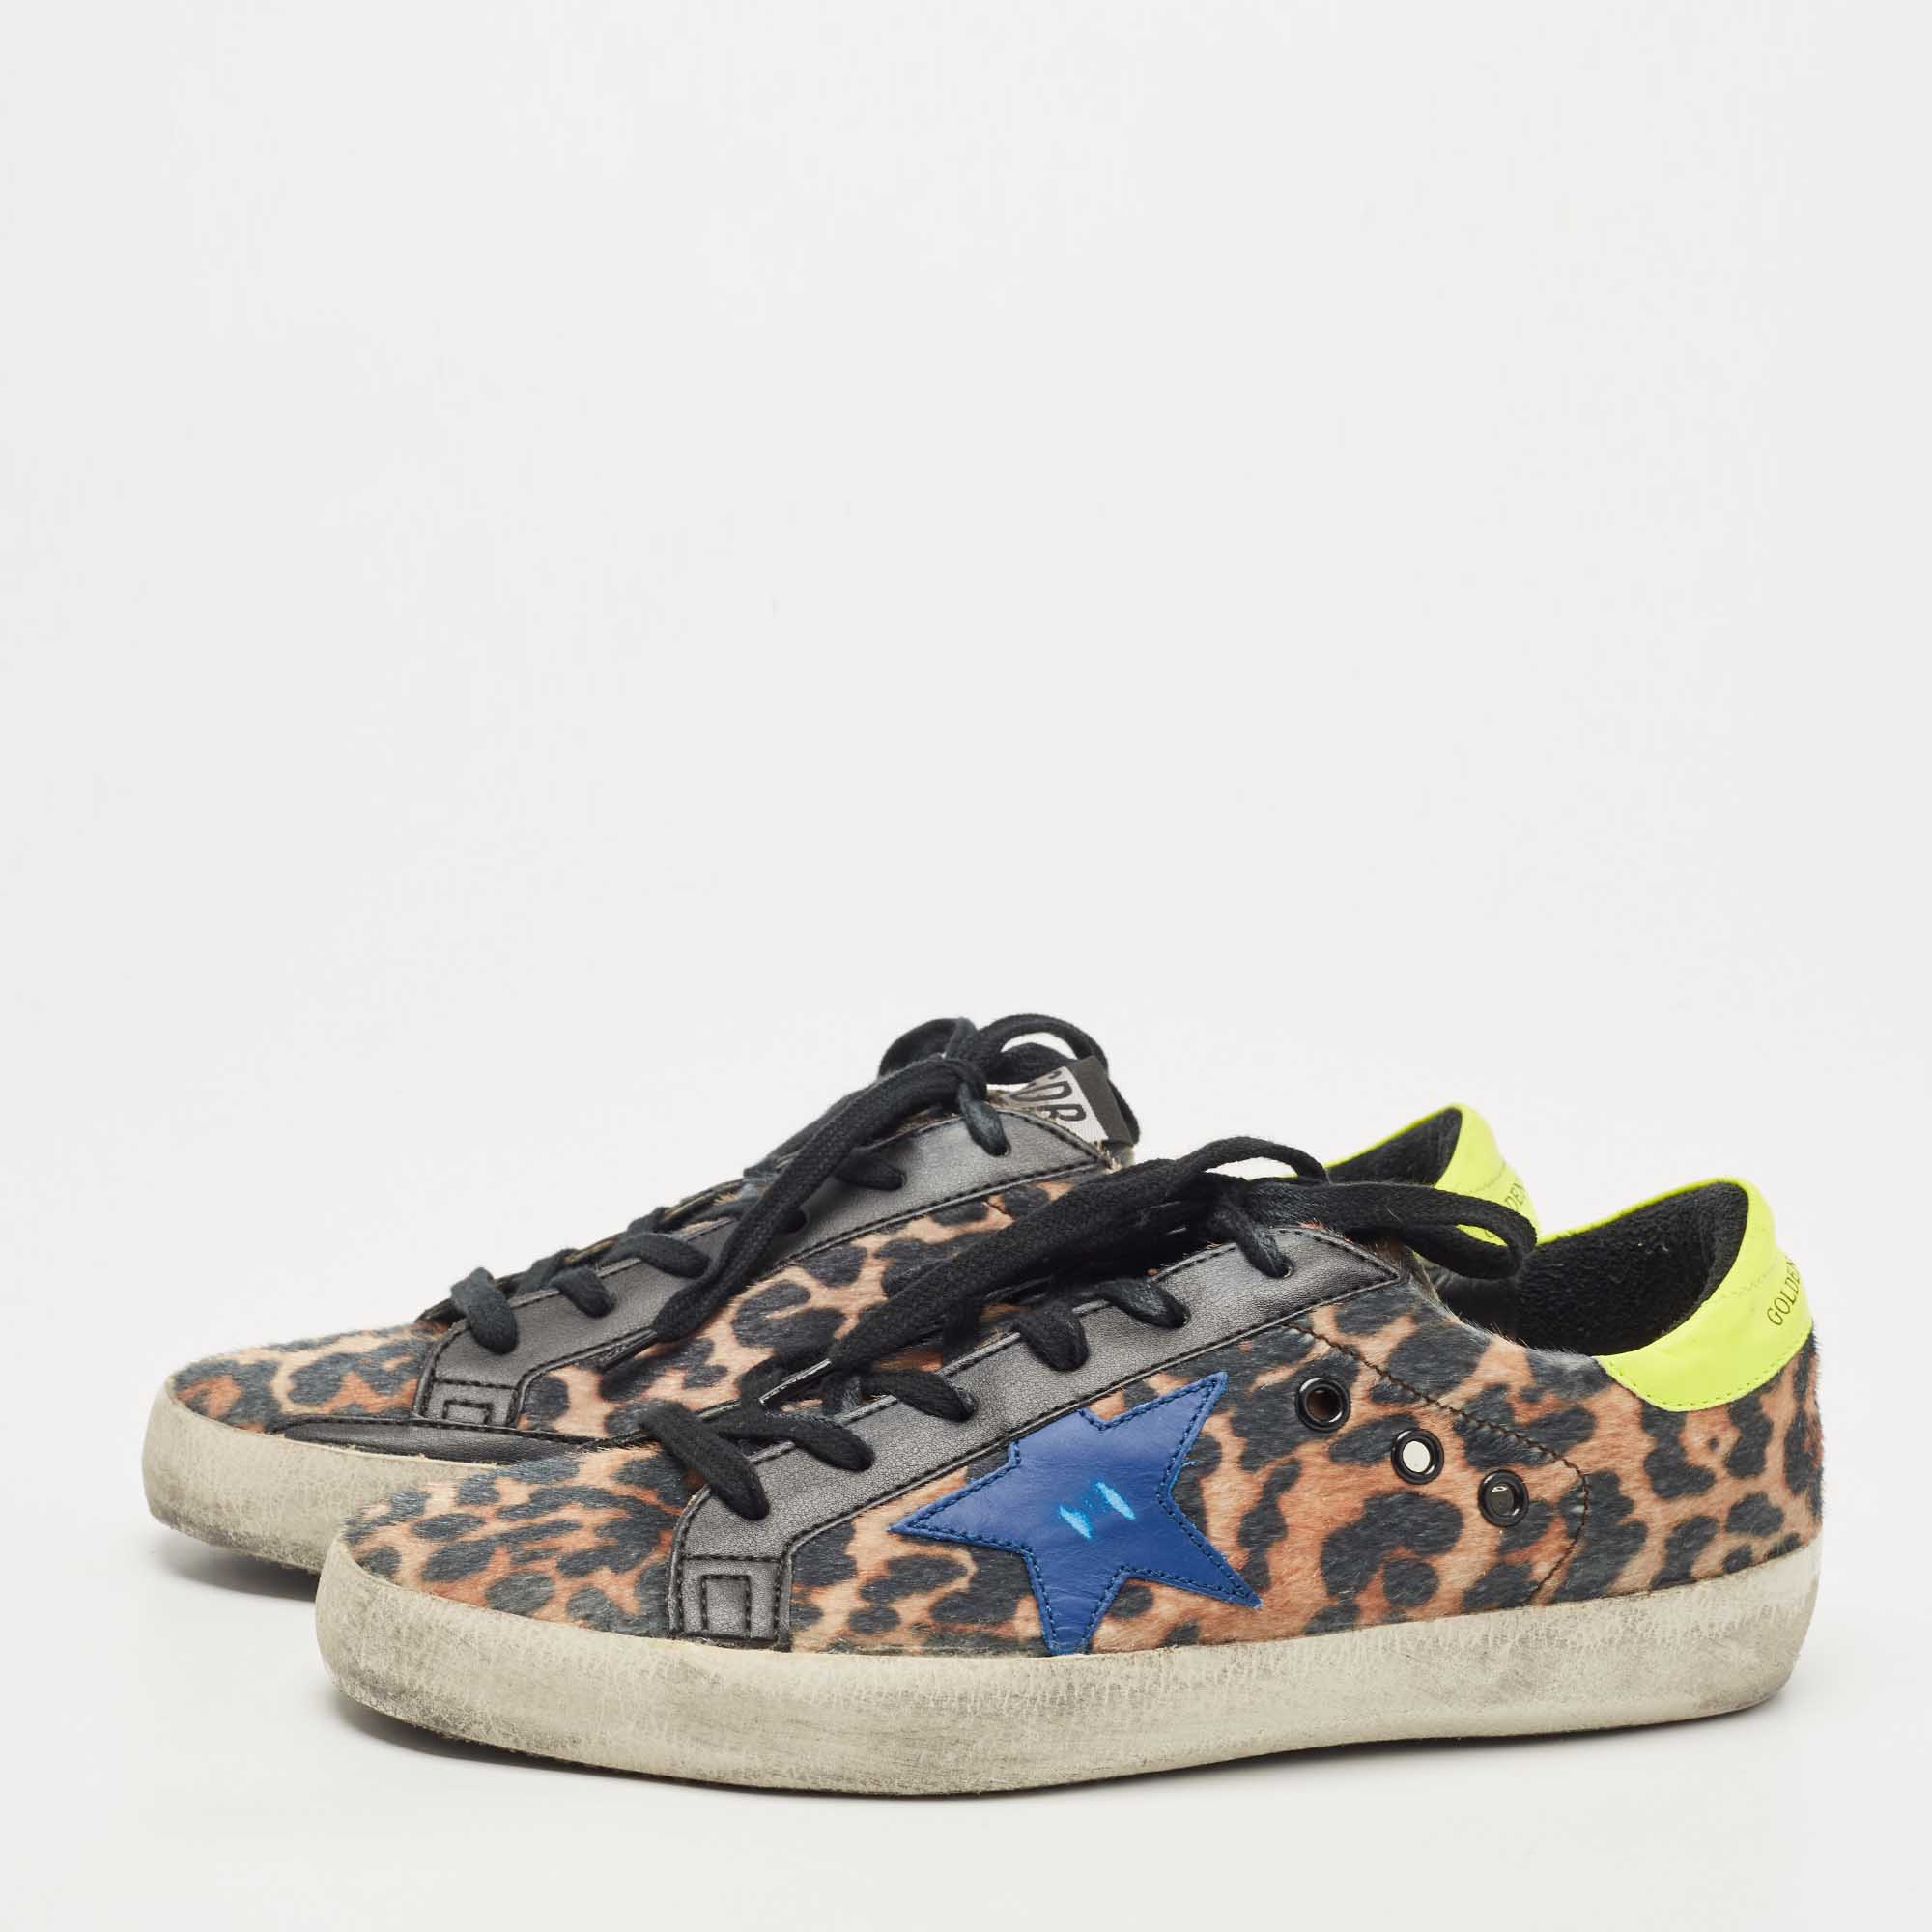 

Golden Goose Multicolor Leopard Print Calf Hair Superstar Distressed Lace Up Sneakers Size